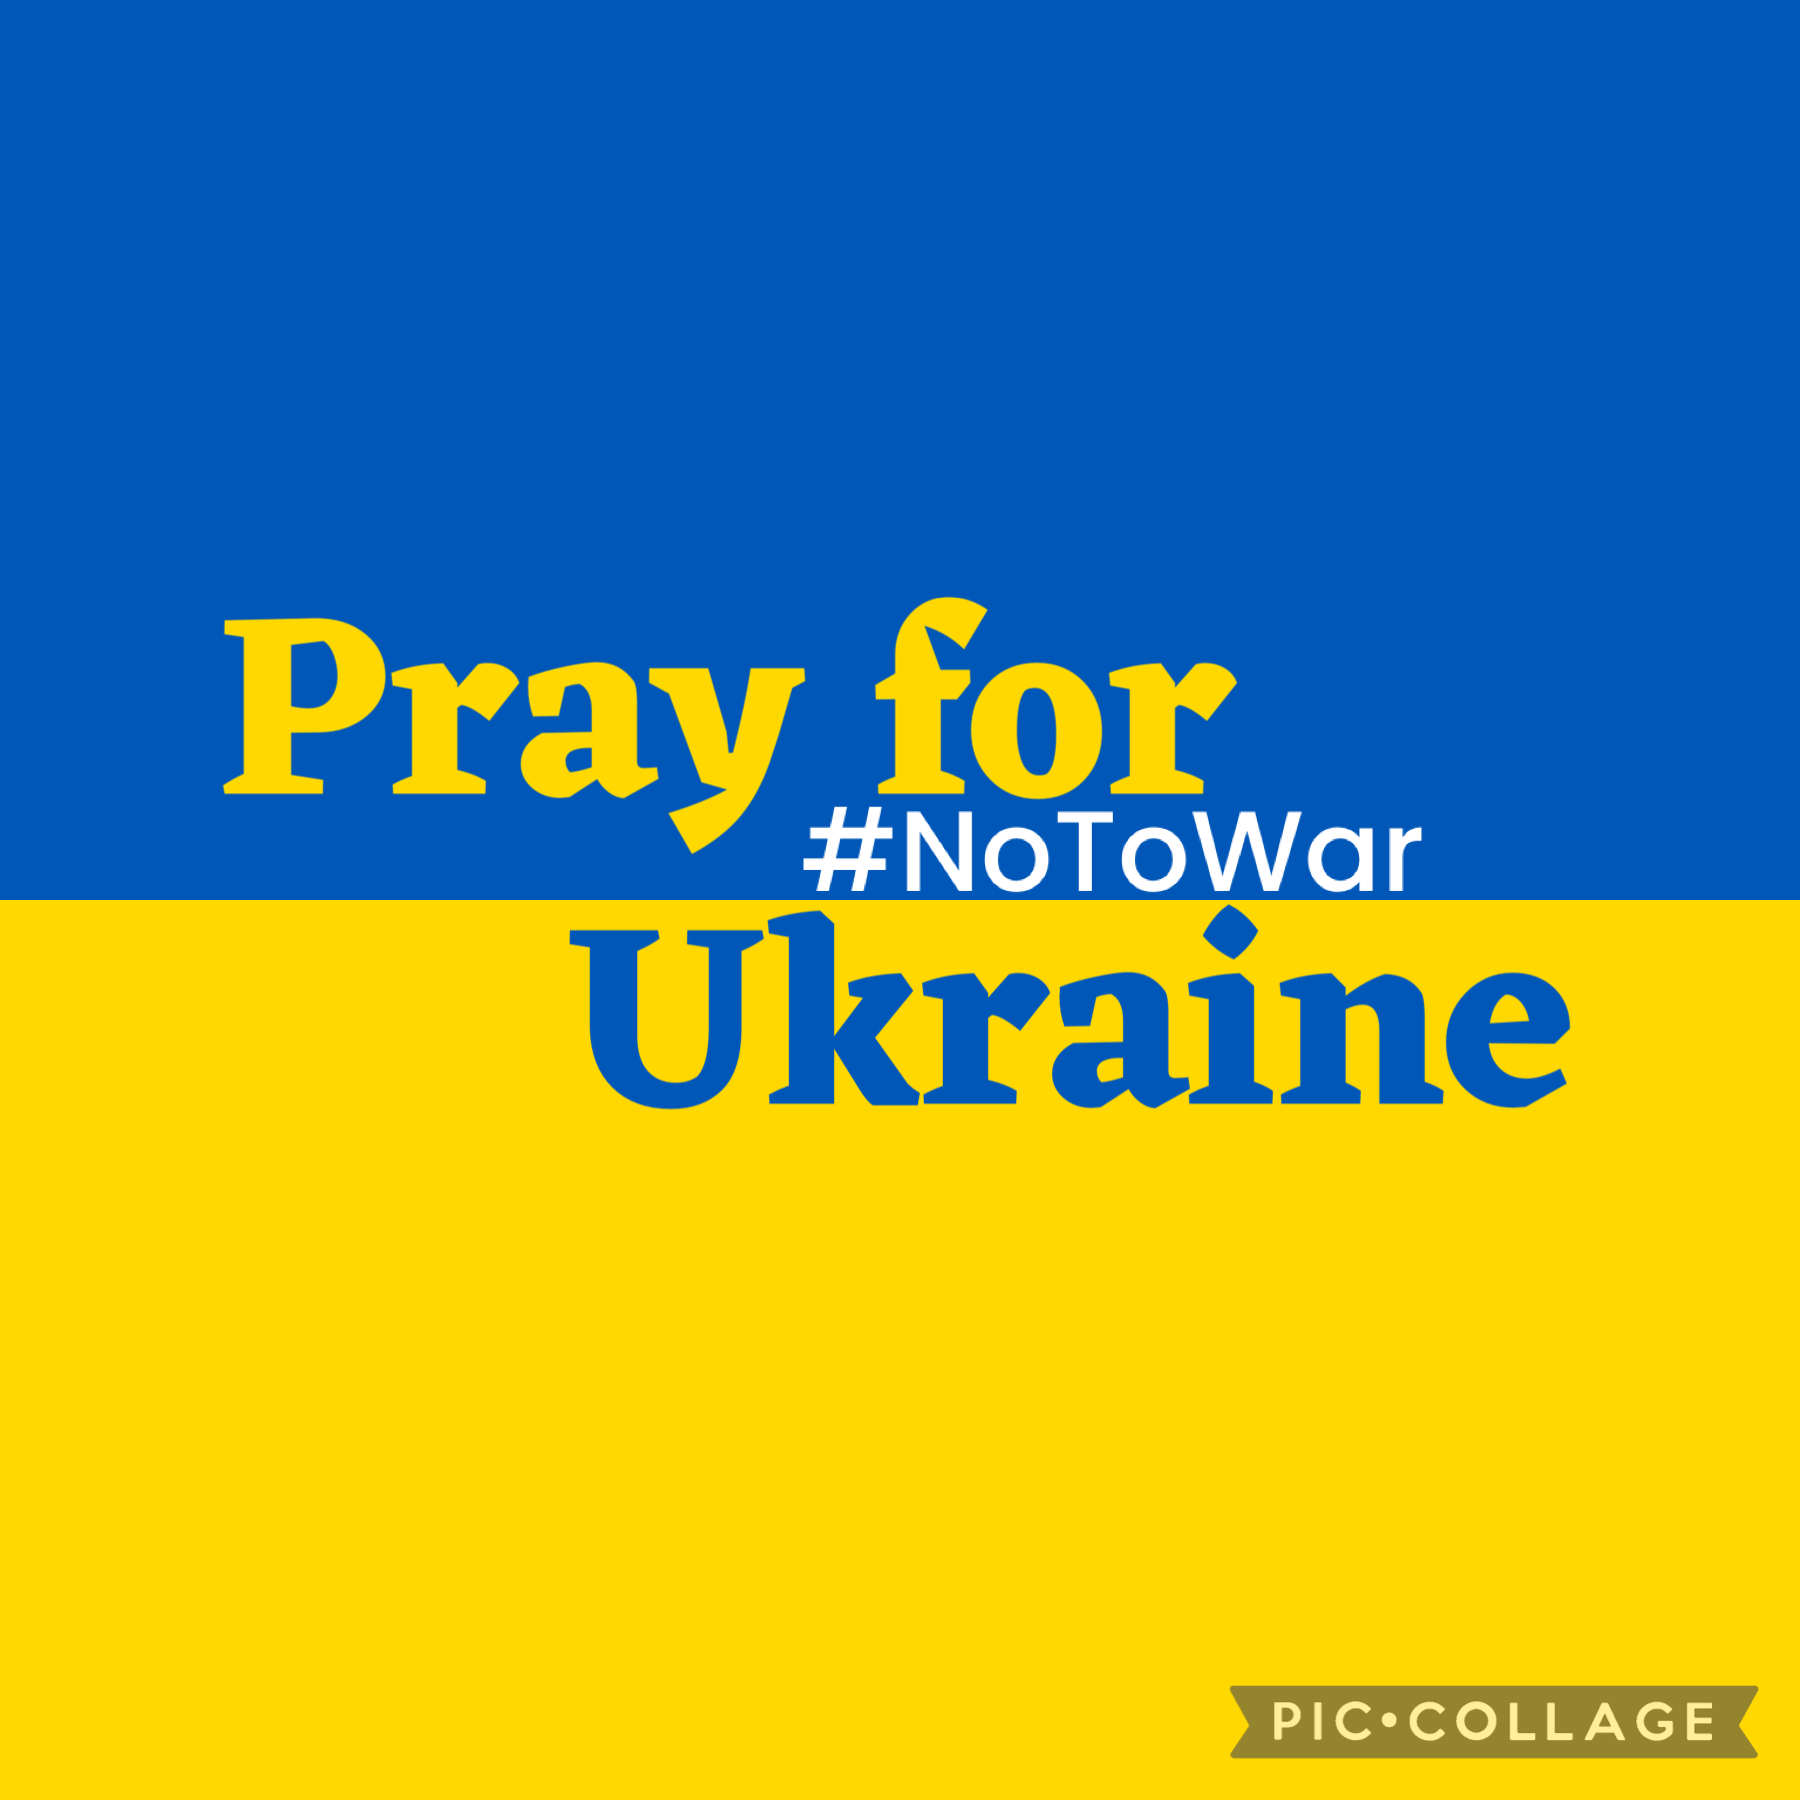 #NoToWar (tap).  
Guys share this in every social media you have!
We need to stop this war!🇺🇦!